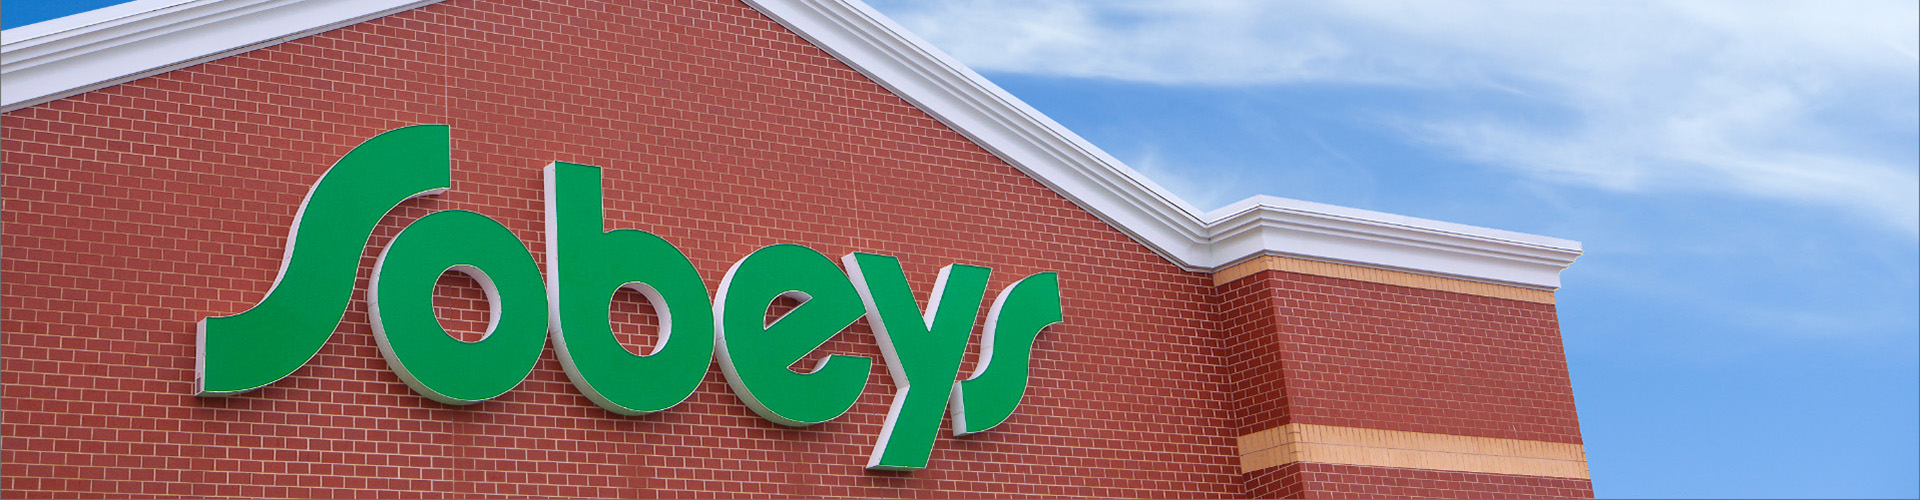 The Sobeys sign on a storefront